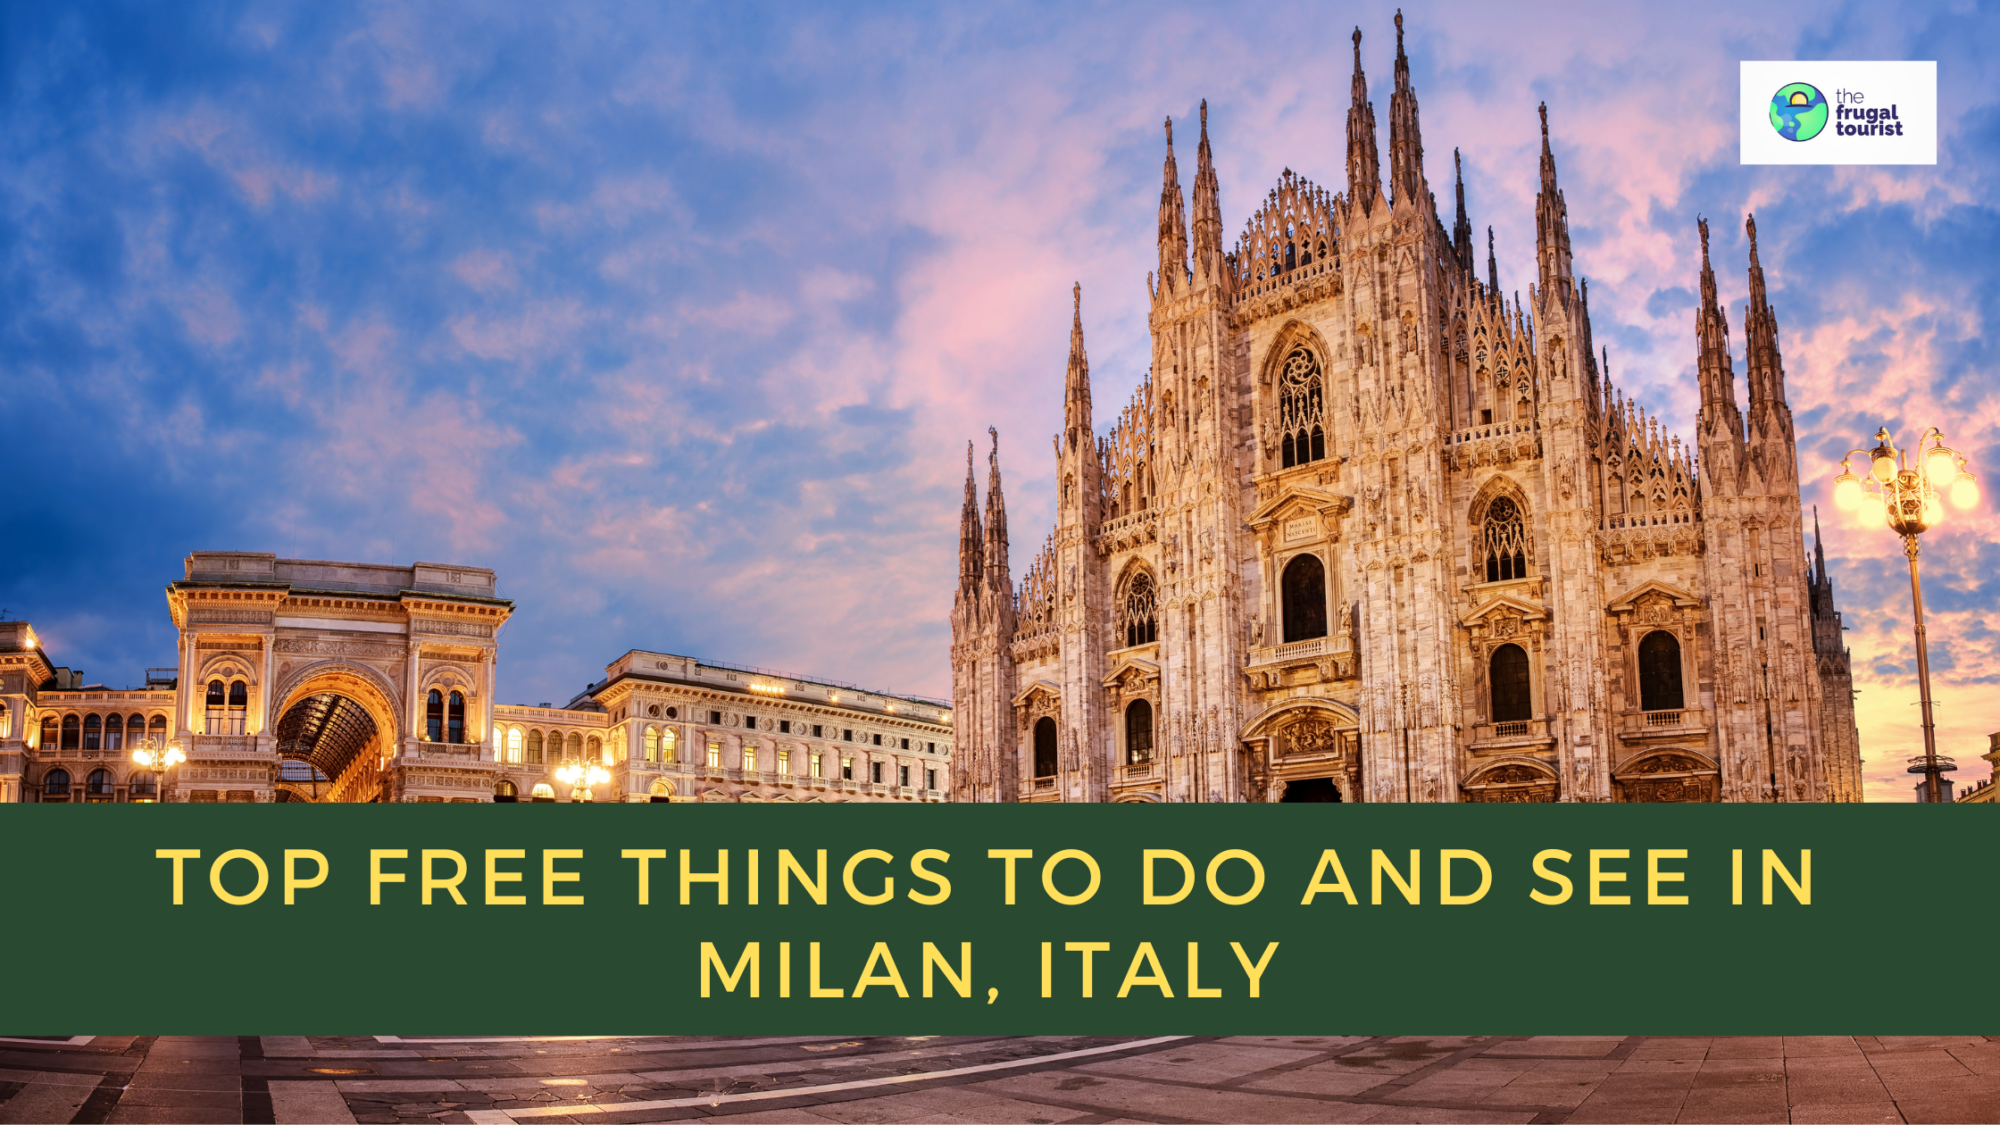 Top Free Things to Do and See in Milan, Italy